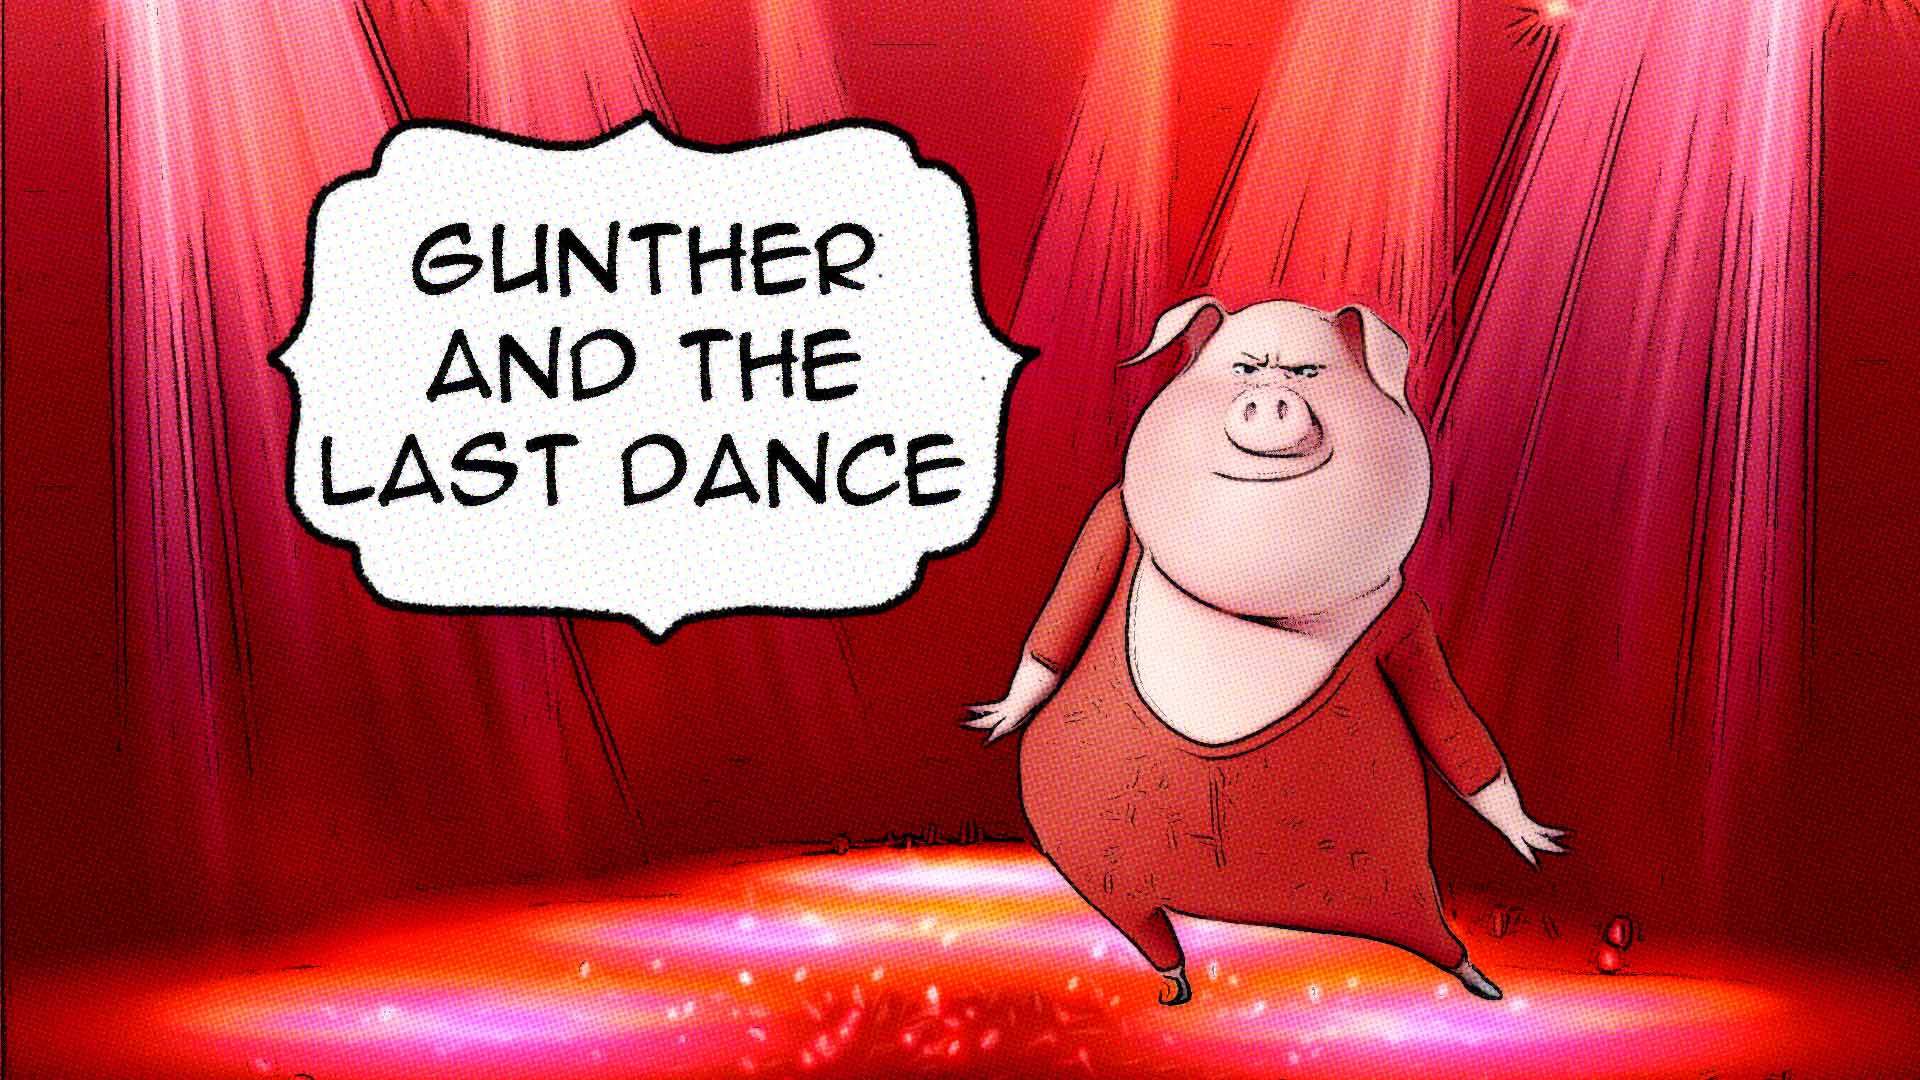 Gunther and the Last Dance